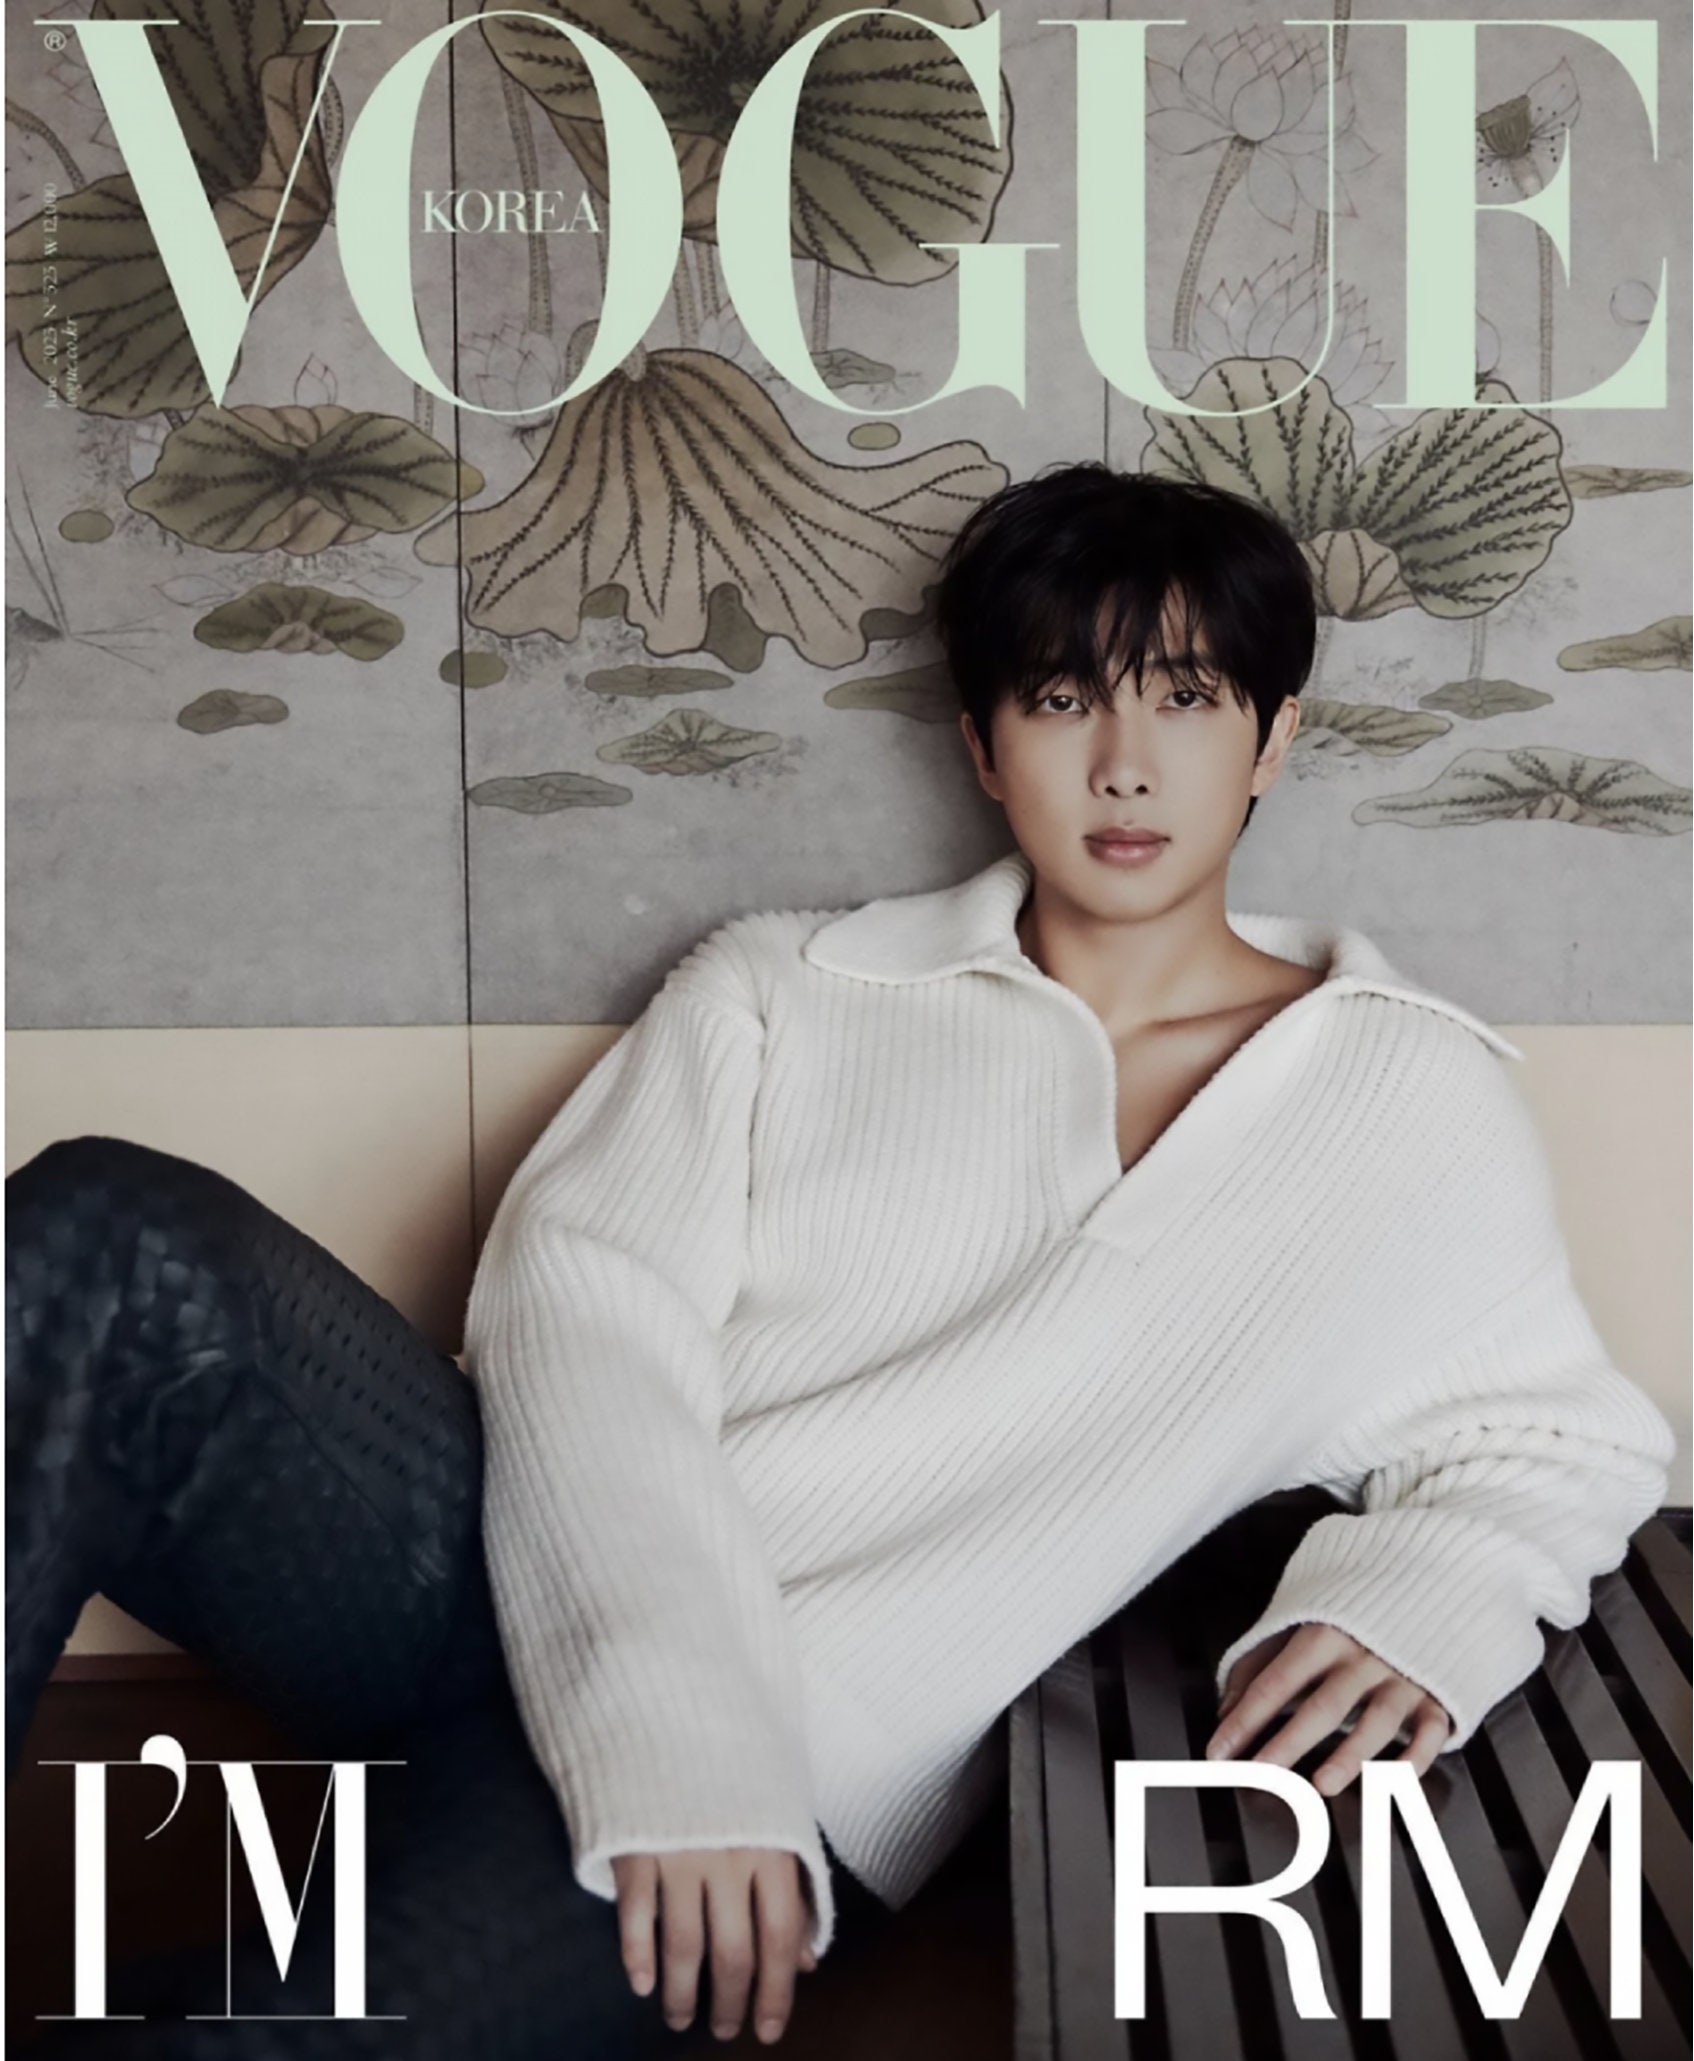 RM on the Cover of Vogue Korea 